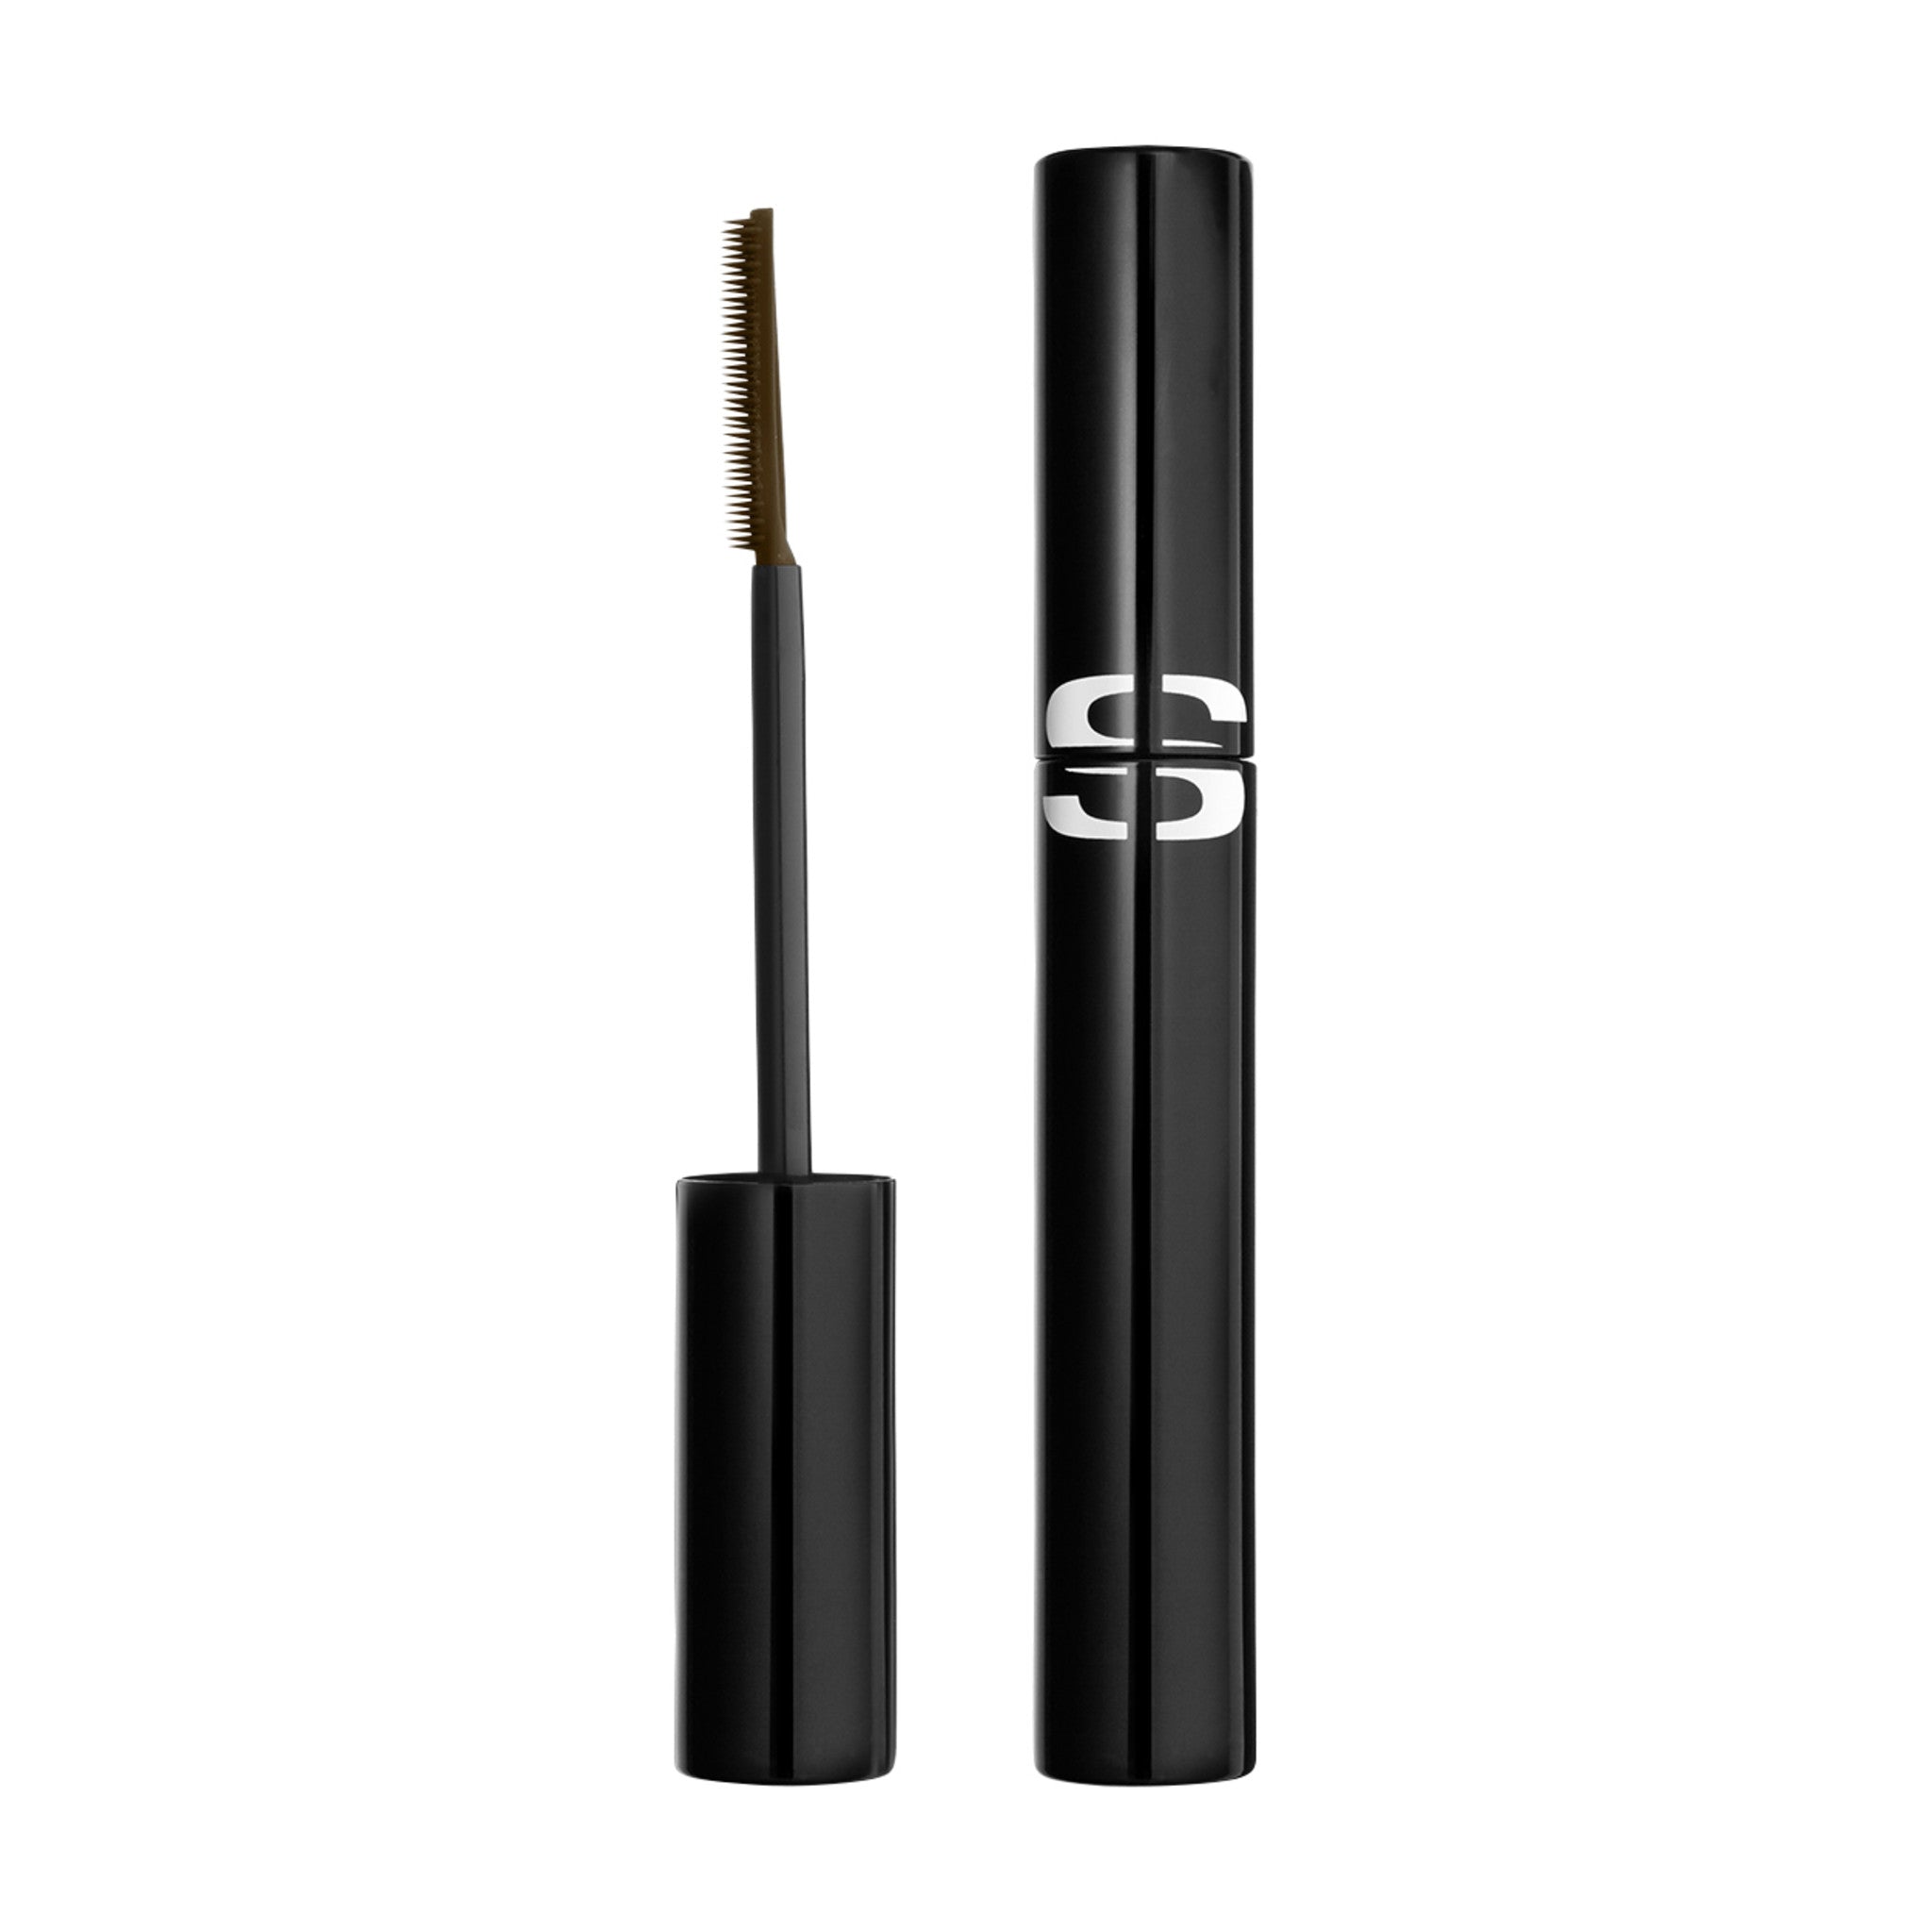 Sisley-Paris So Intense Mascara Color/Shade variant: 2 Deep Brown main image. This product is in the color brown